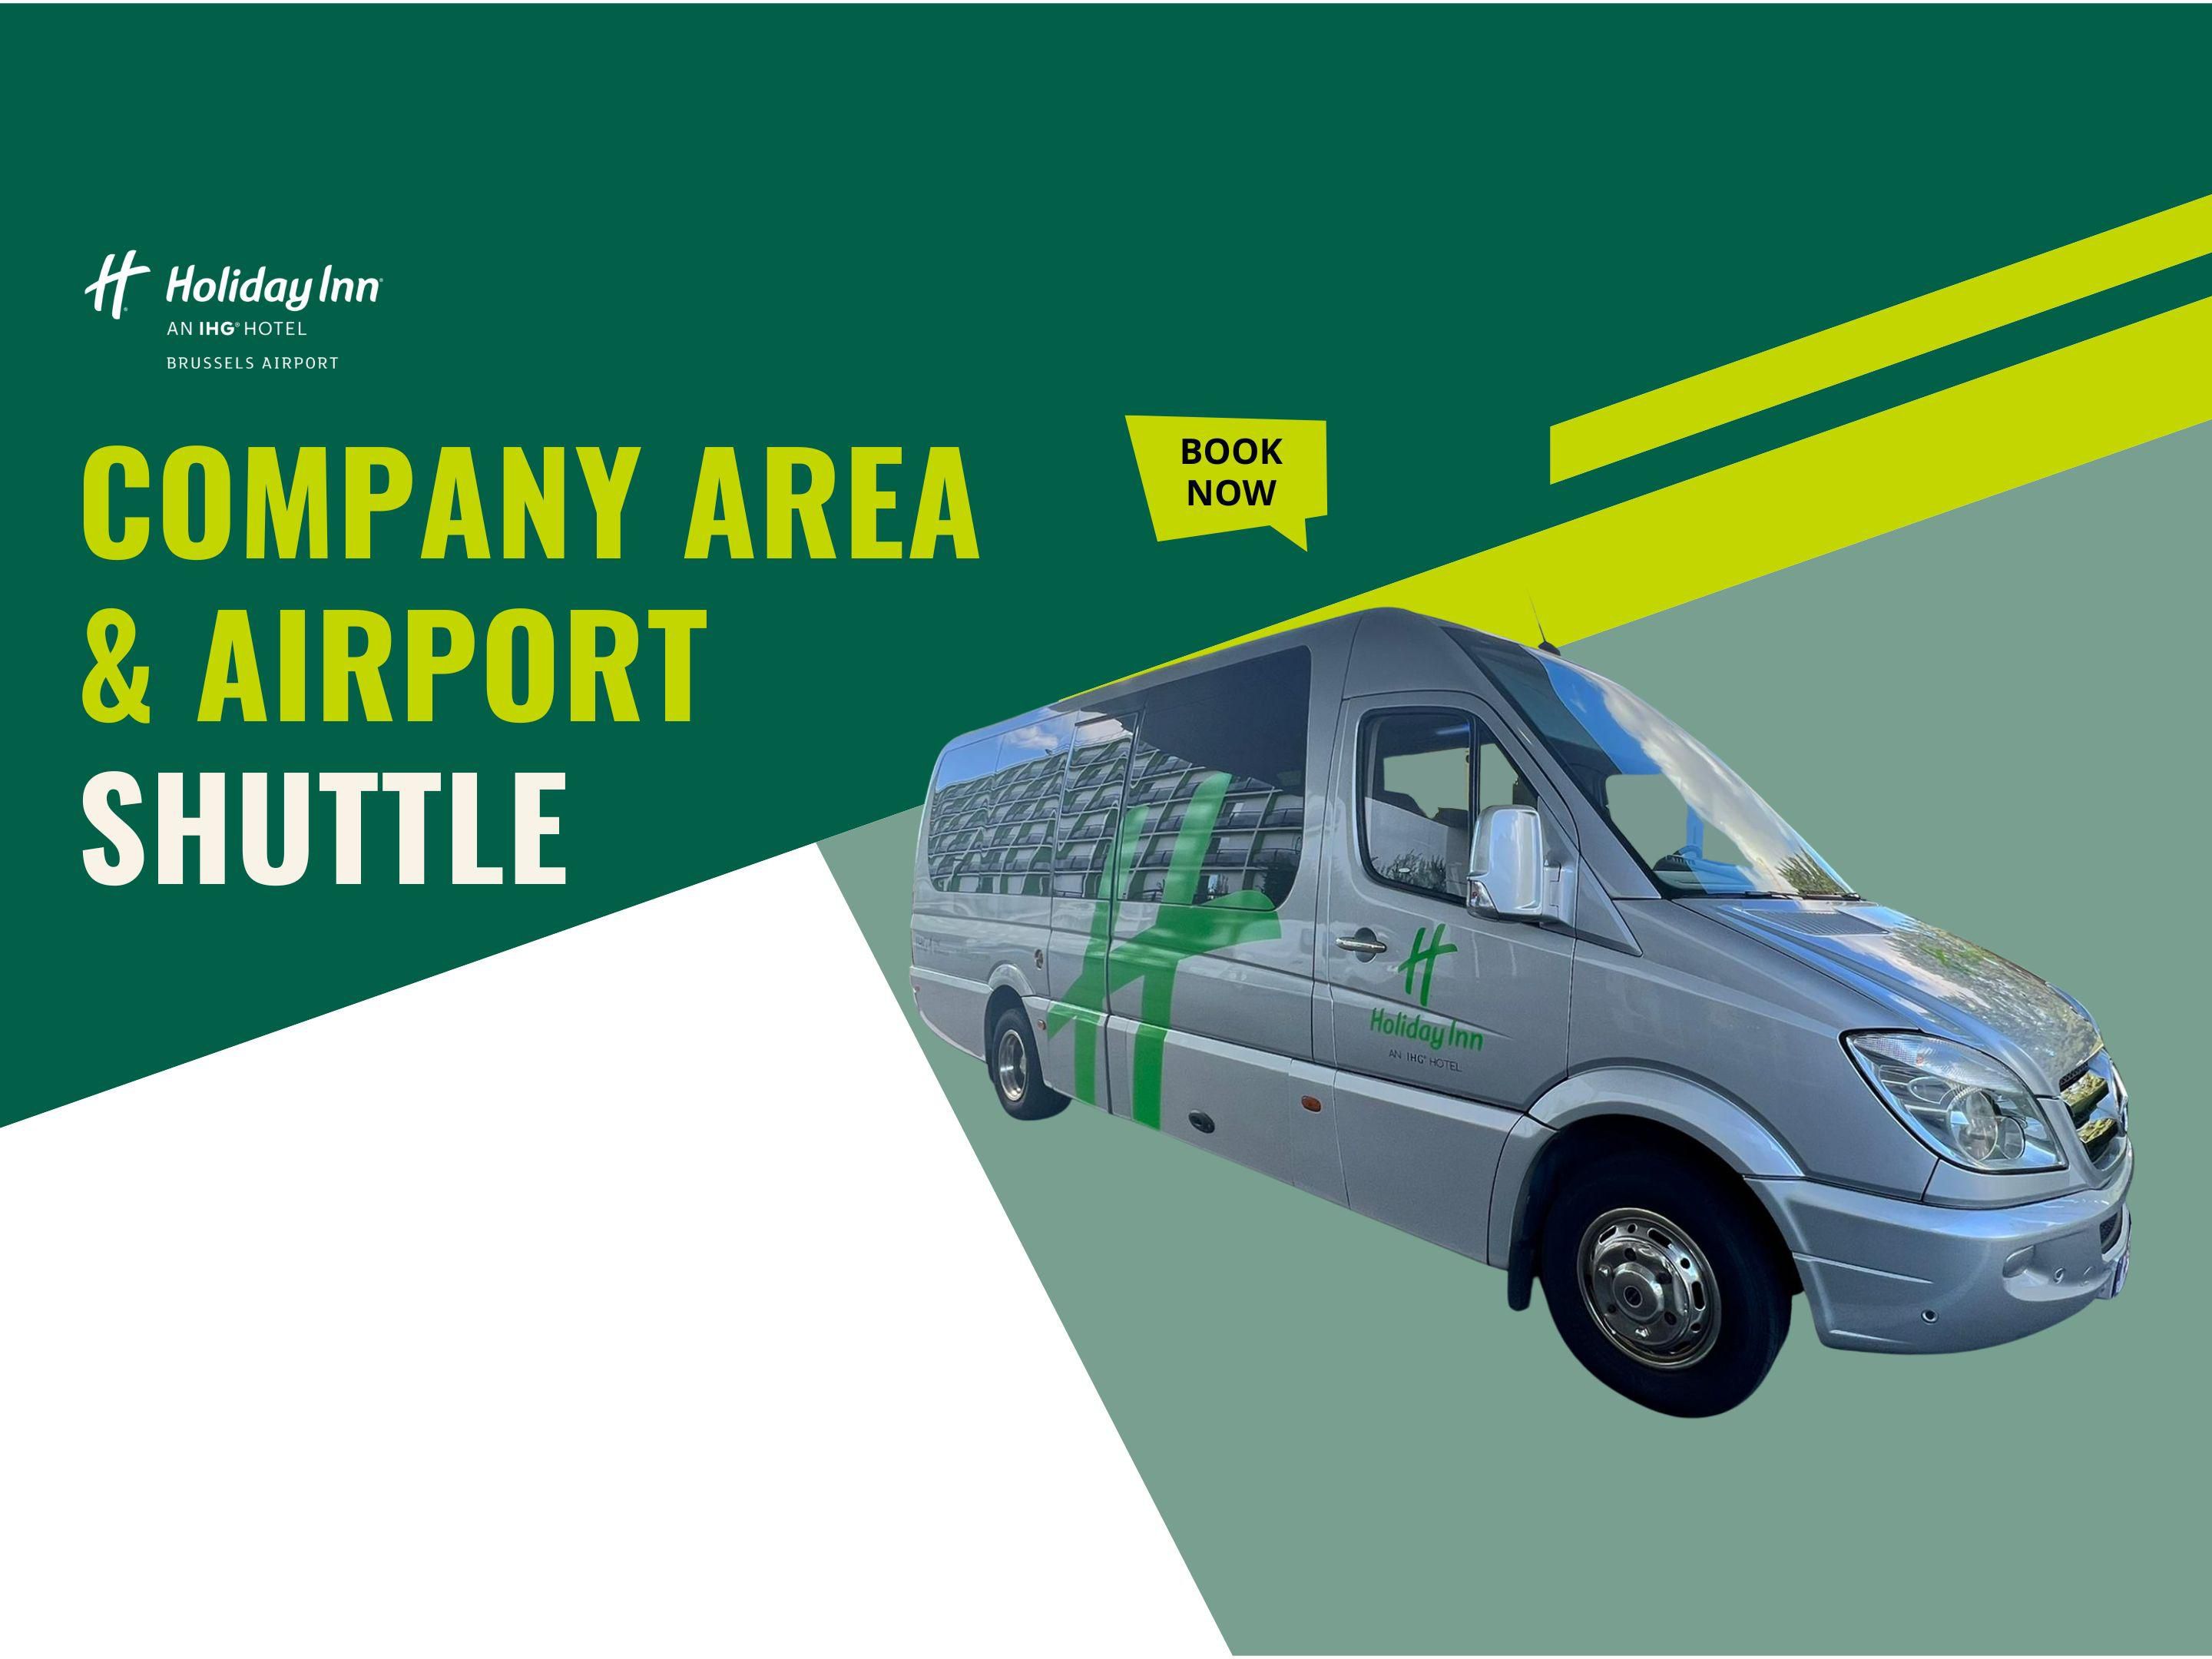 Need a lift to the national airport? – Or else, need a lift to your company? 

We have got you covered.  Sit, relax, and let us drive you.
Shuttle runs on fix timings so make sure you check out the schedule and book your seat online.
Places upon availability.